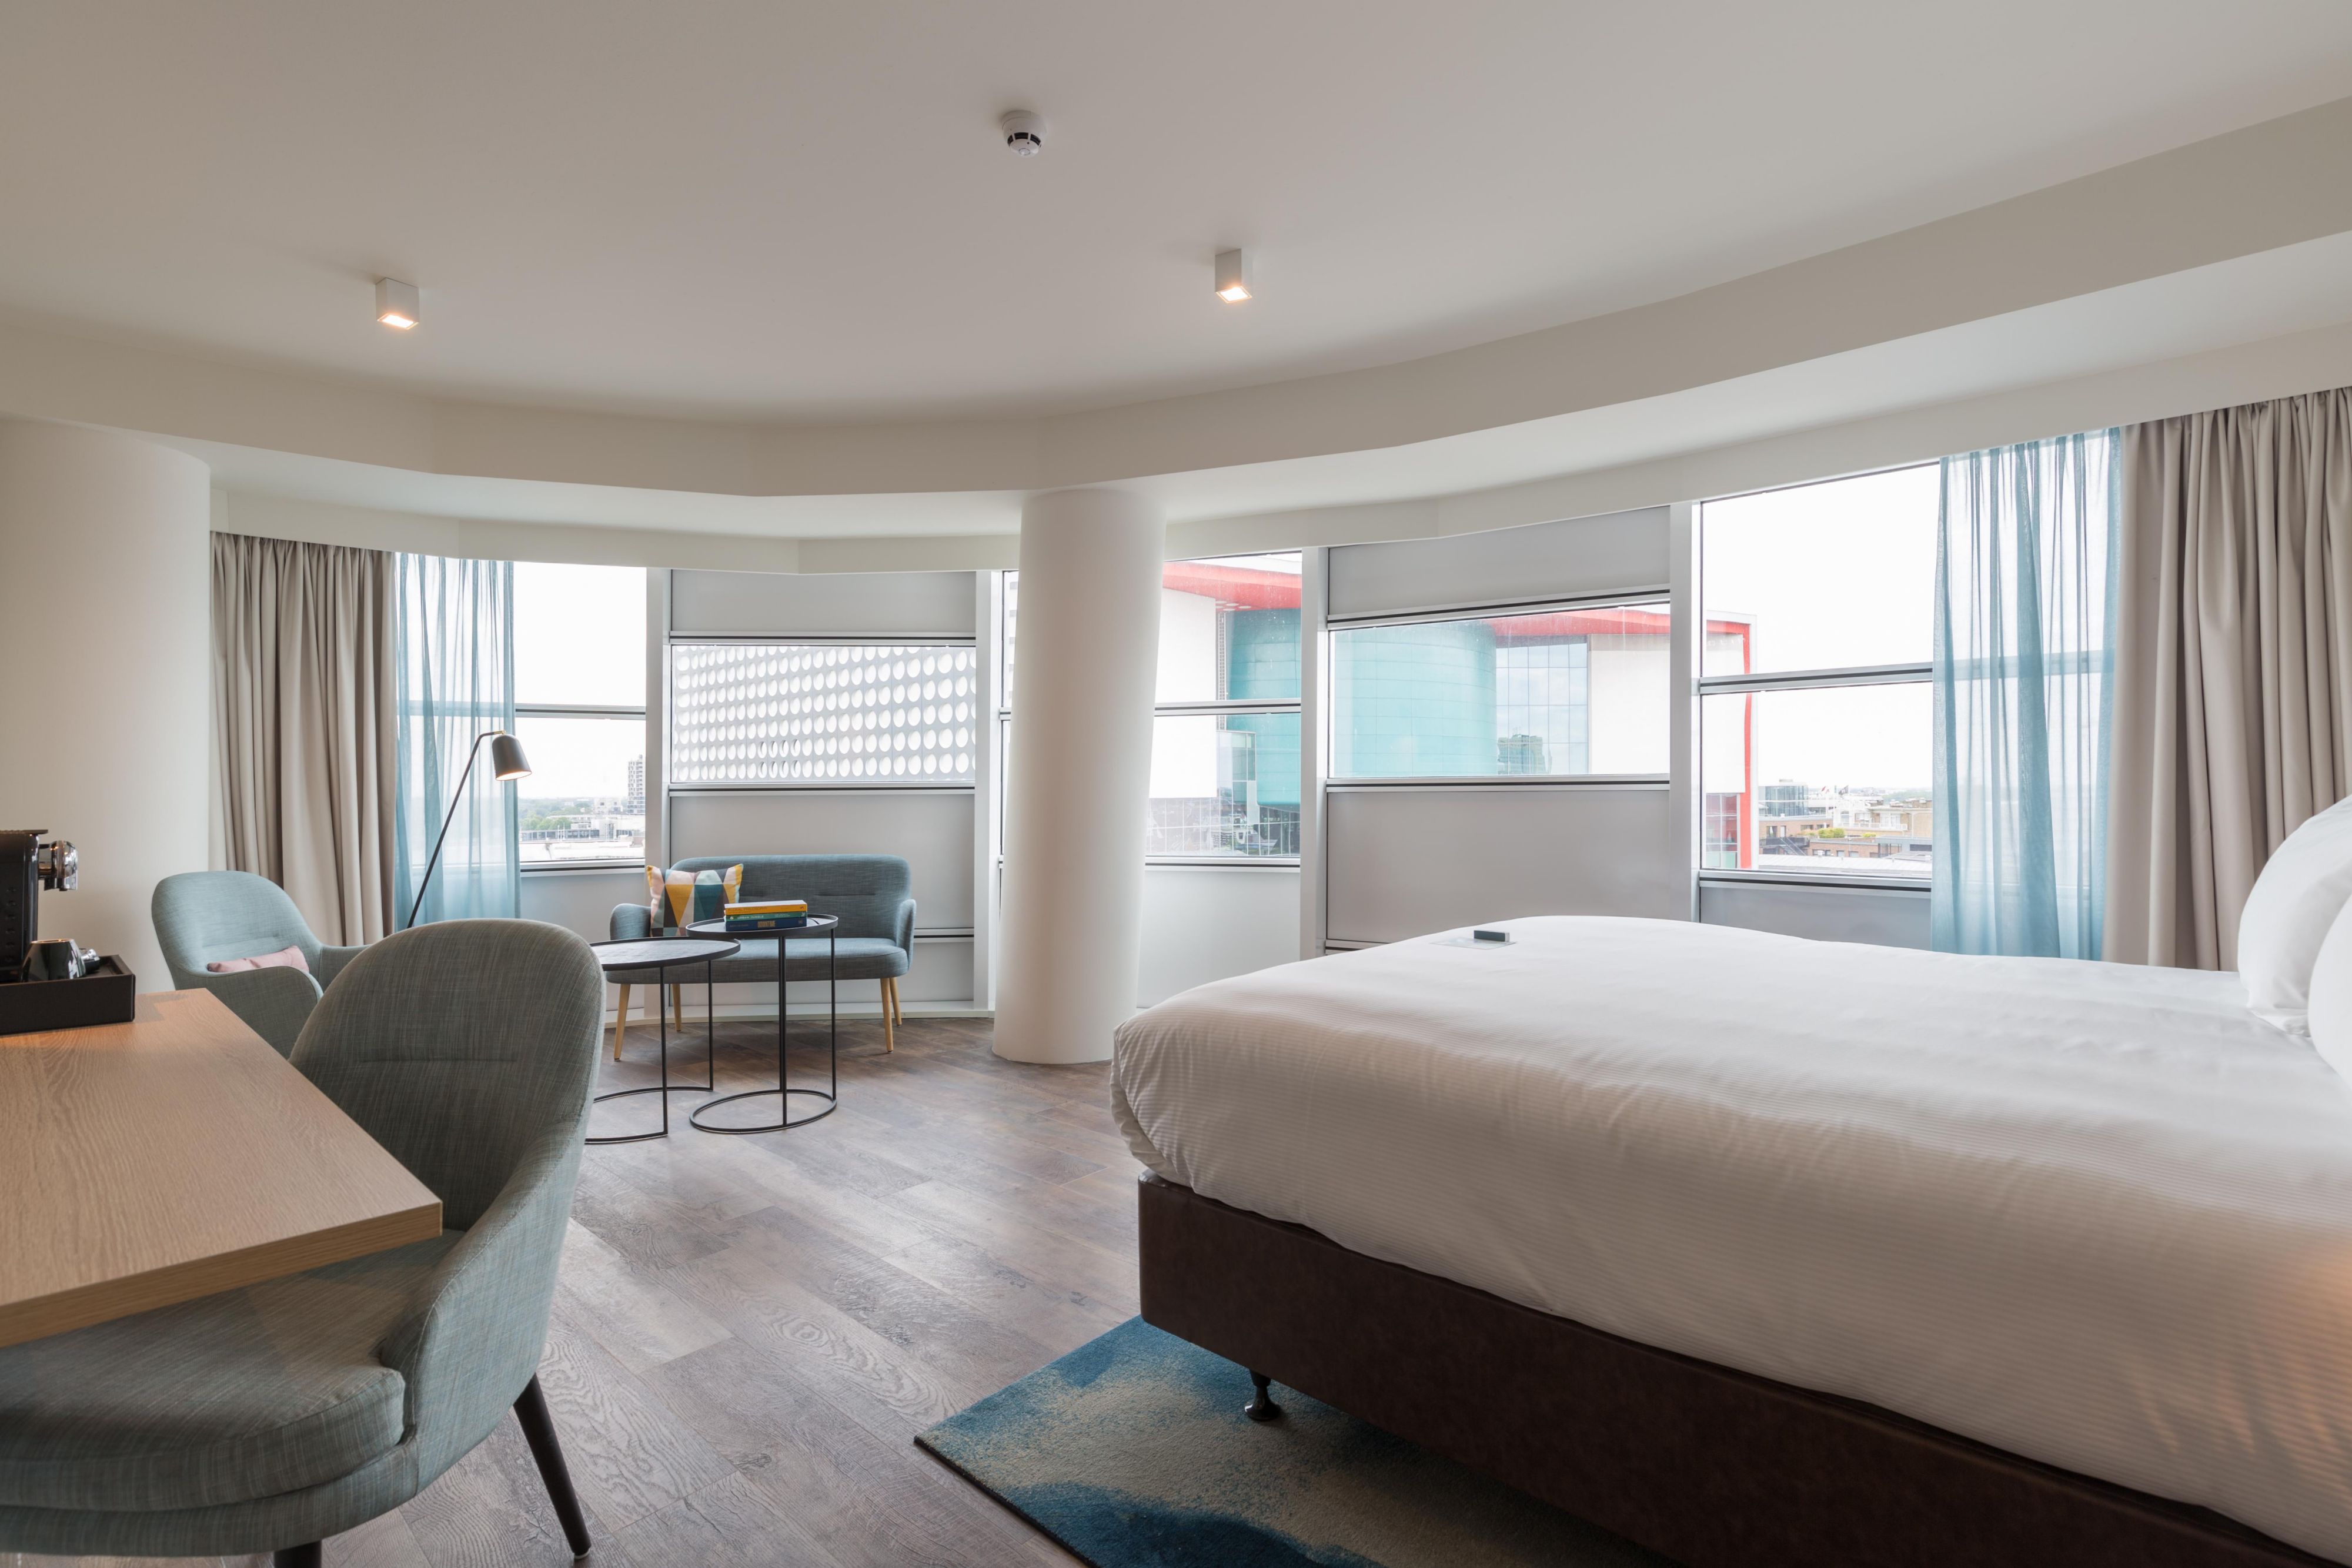 Our premium room offers more space with all the comfort you need